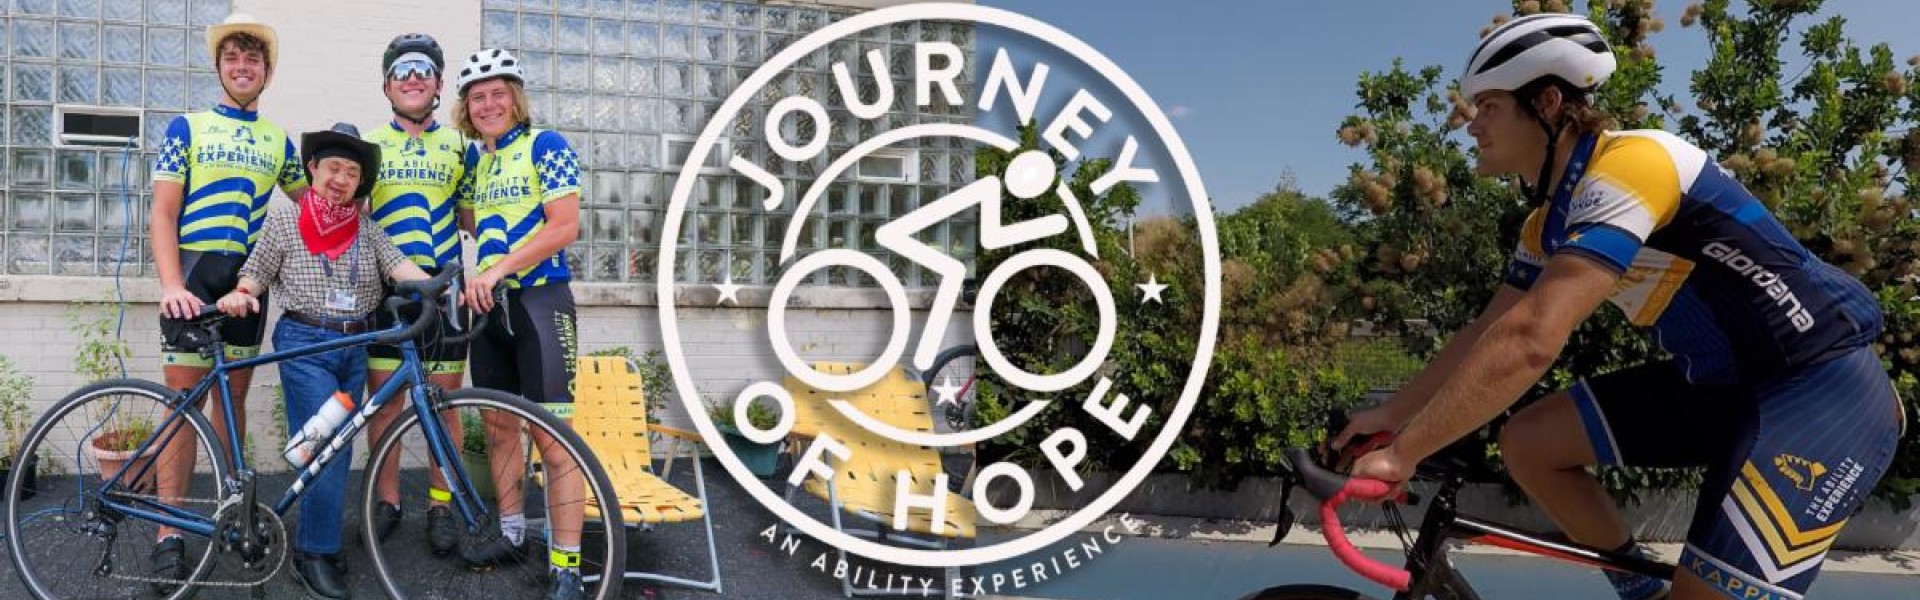 Journey of Hope Friendship Ride Along graphic